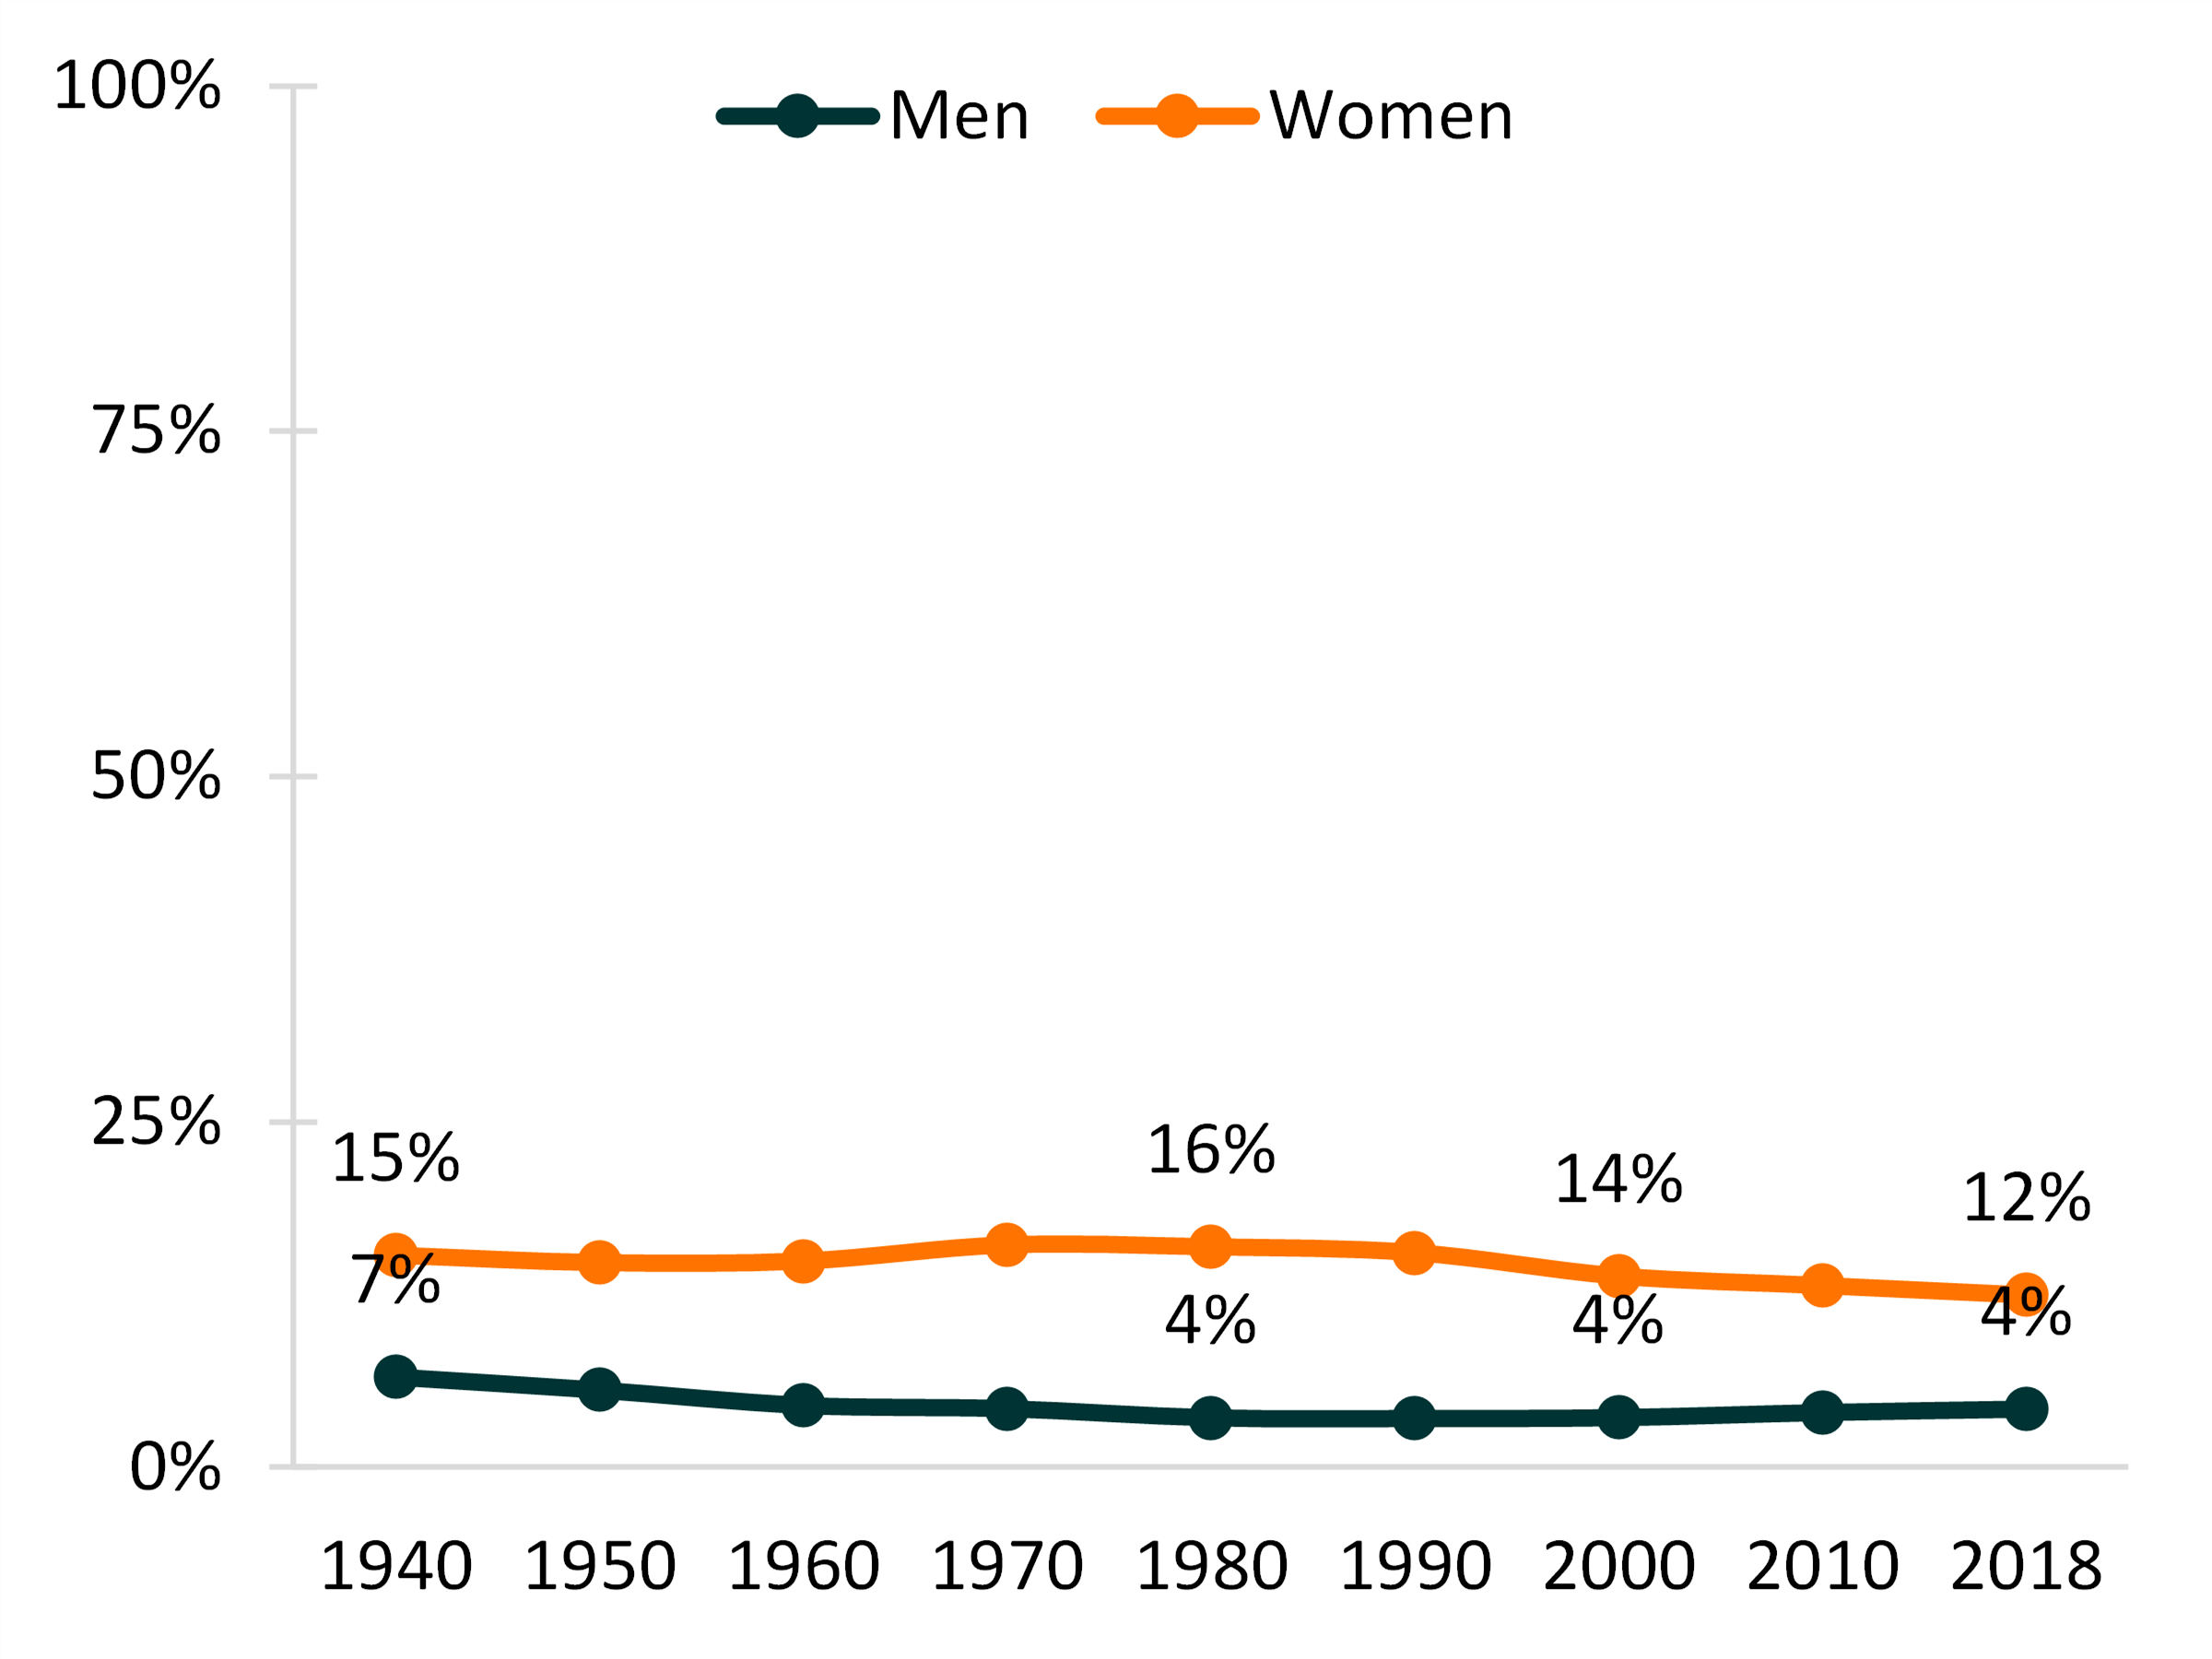   Figure 1. Proportions of Men and Women Currently Widowed Among Those Ever Married, 1940-2018